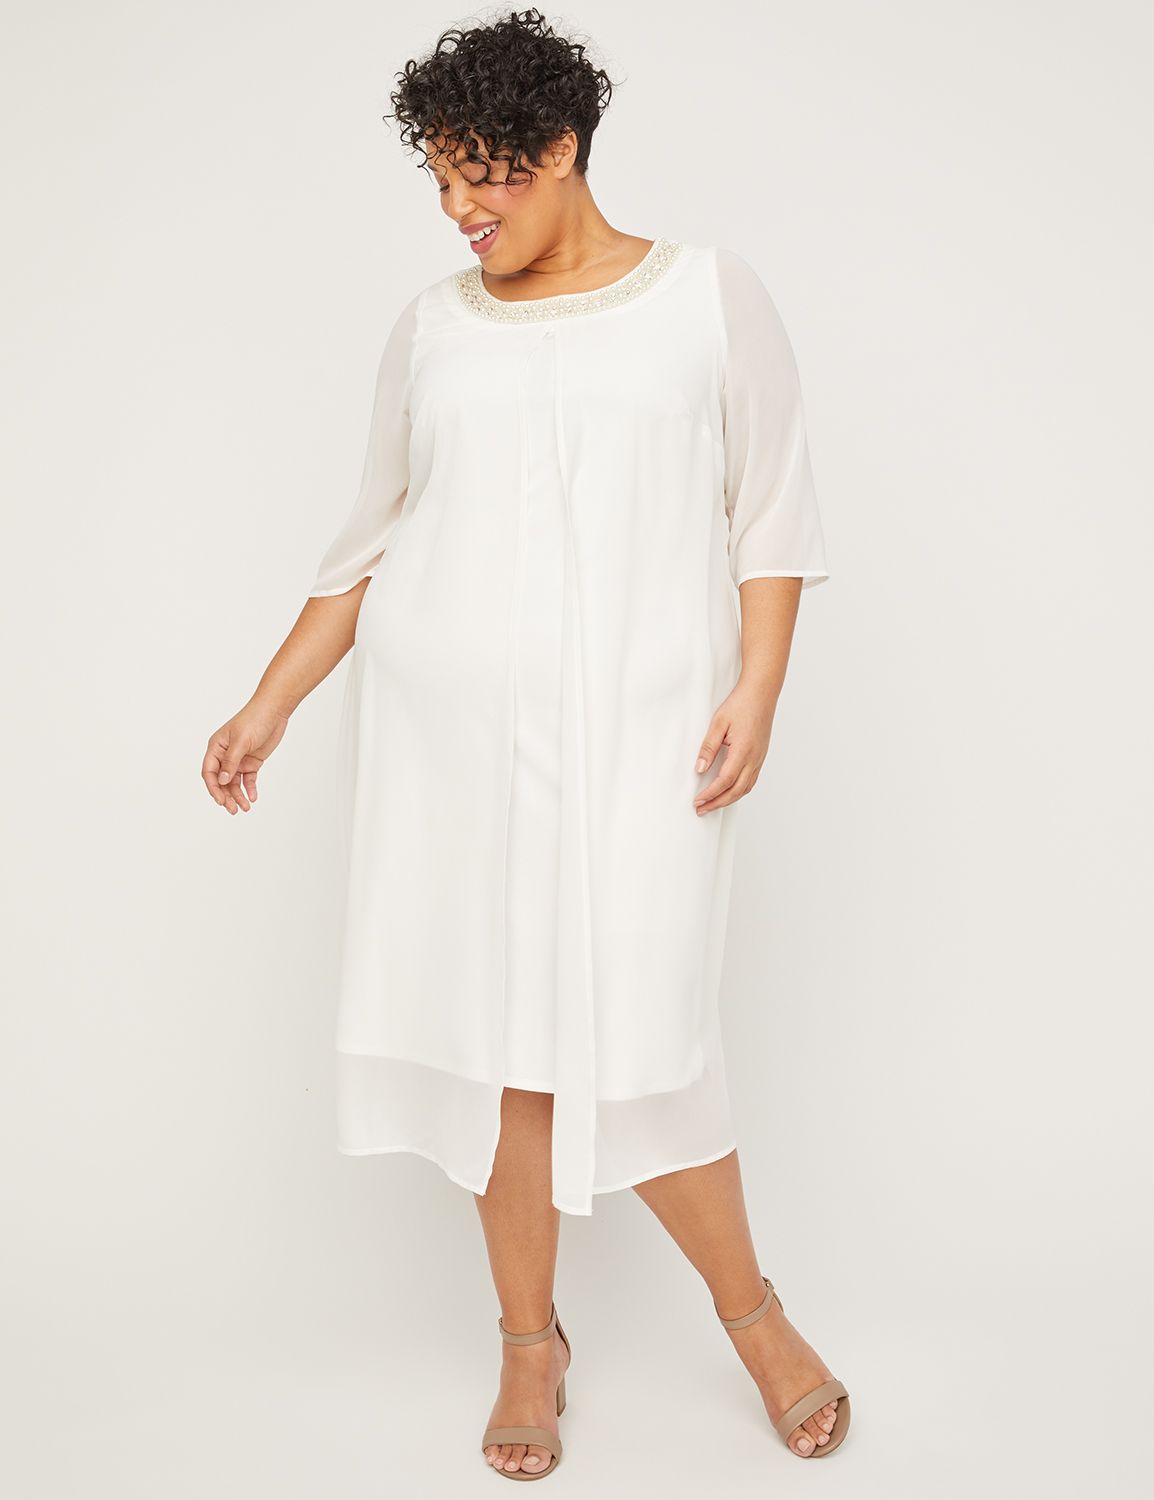 plus size formal dresses catherines